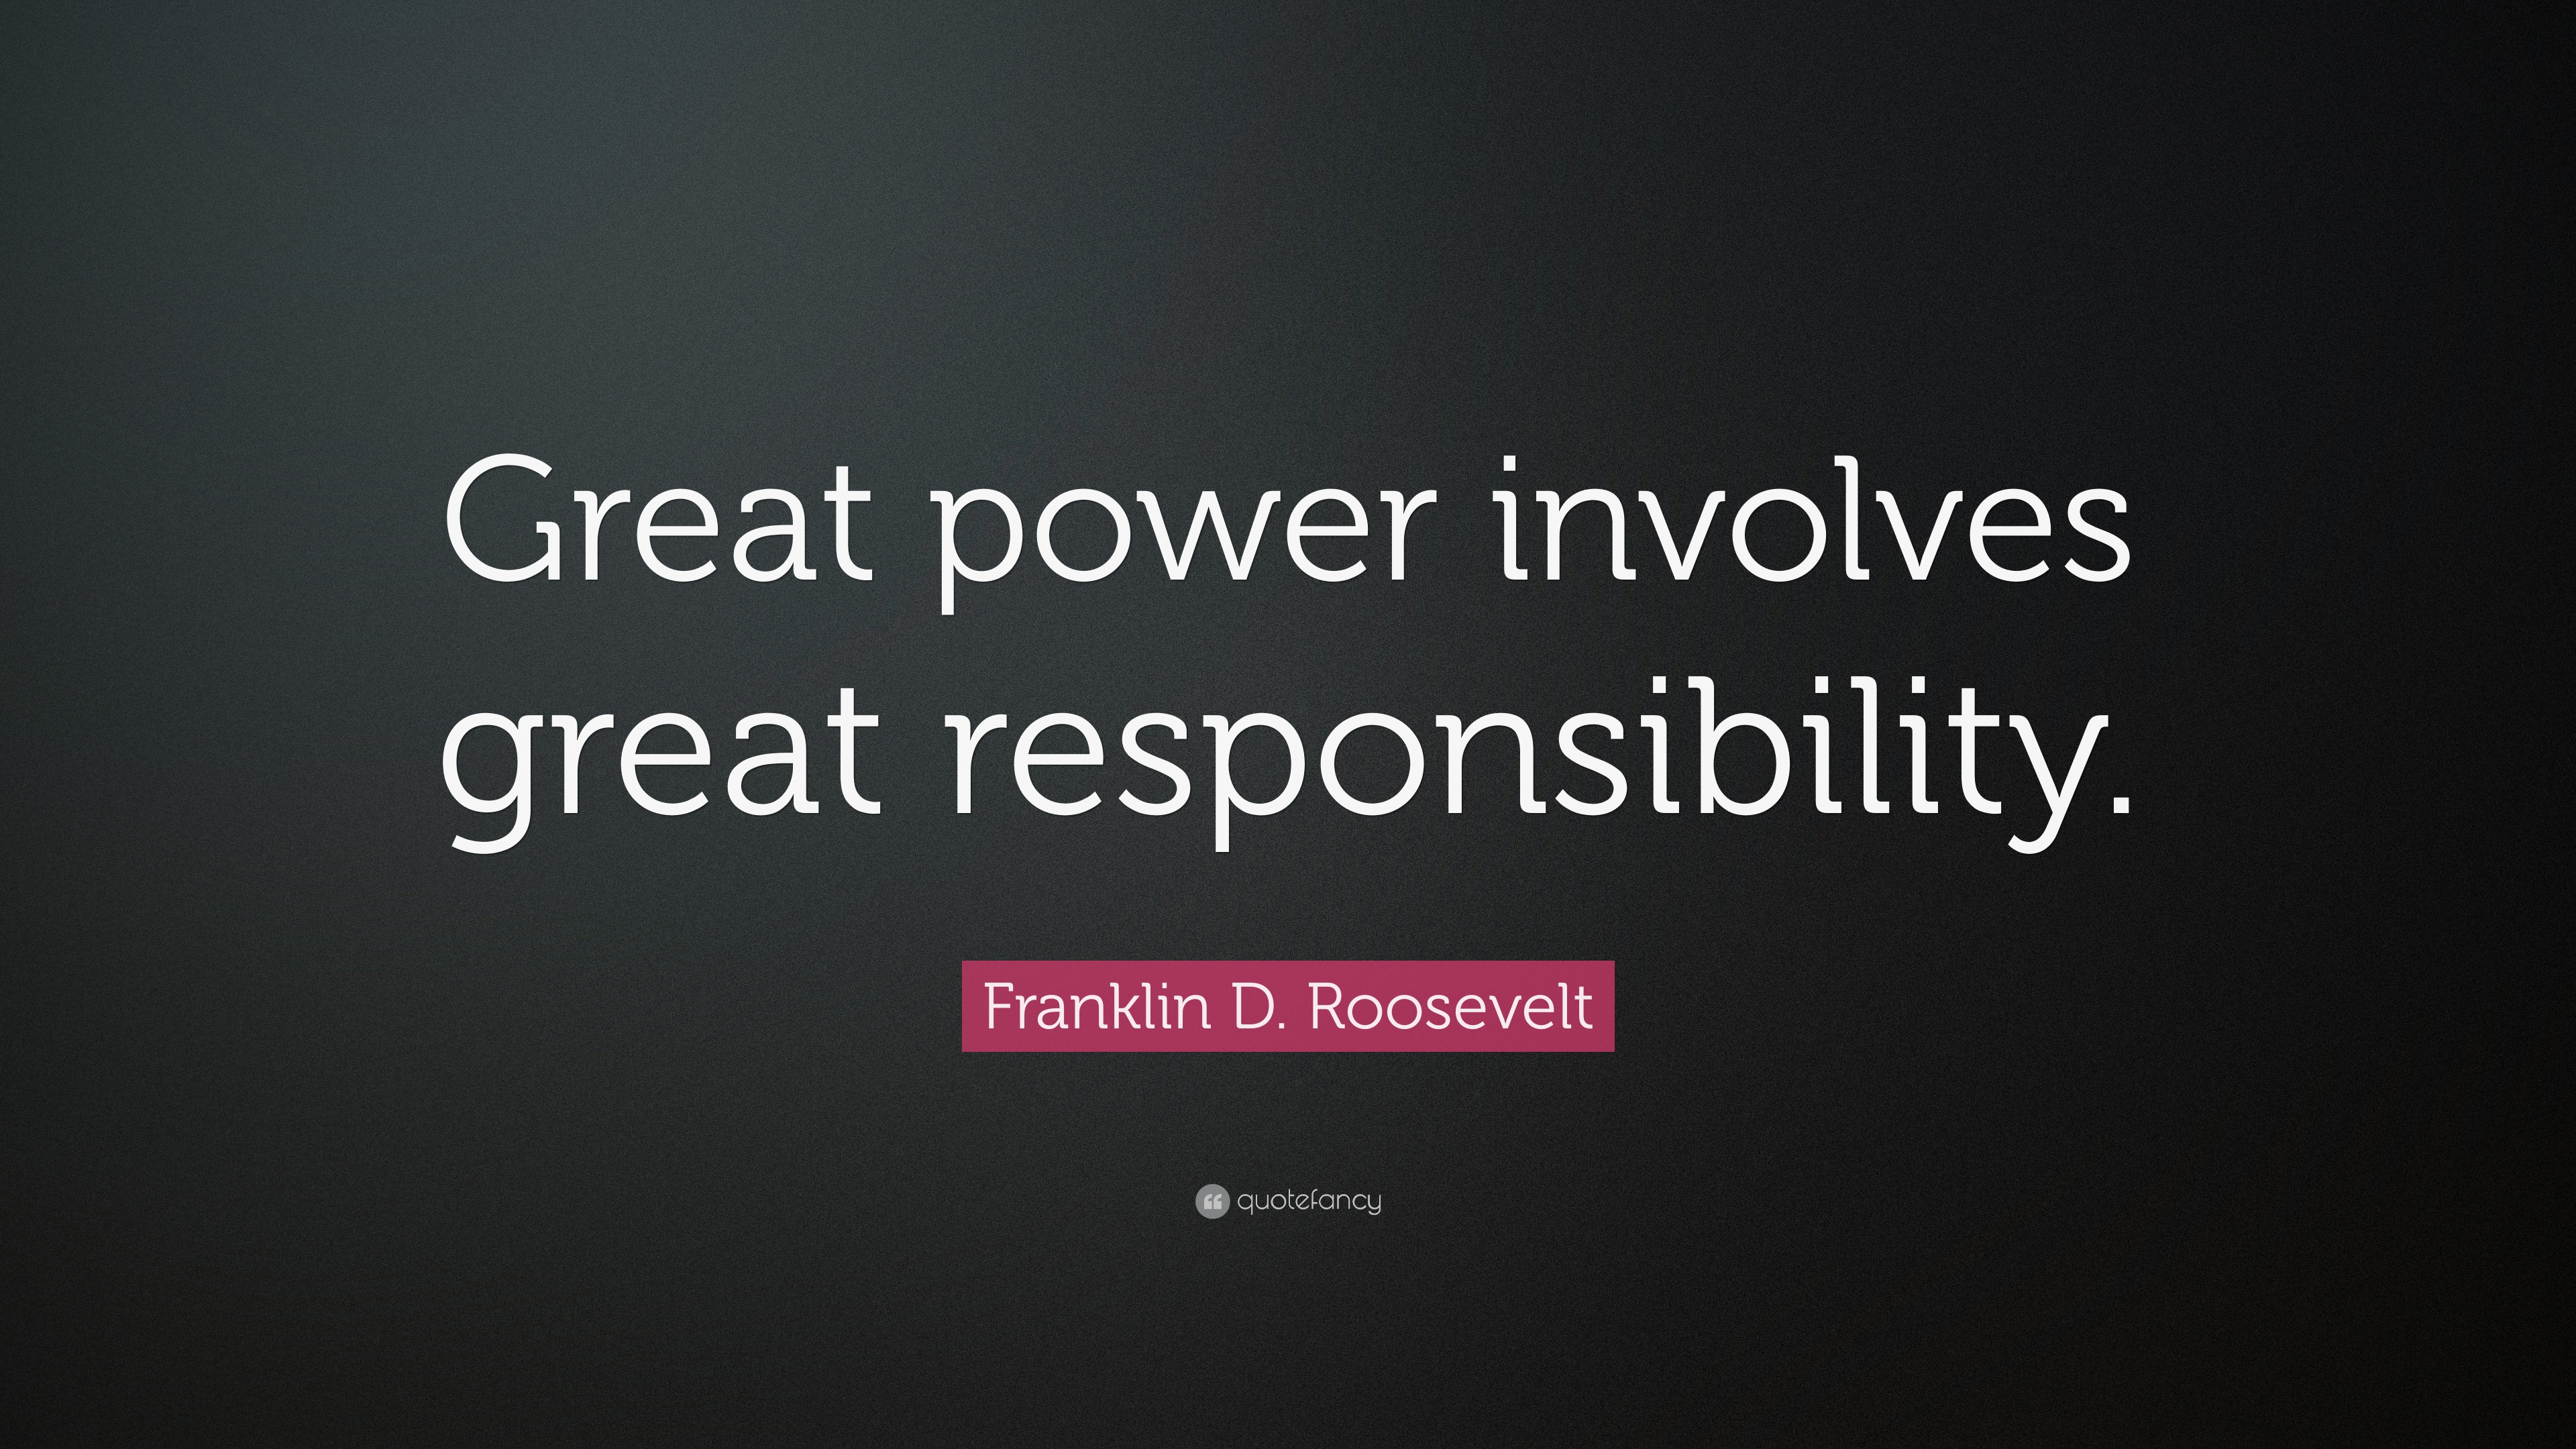 Franklin D. Roosevelt Quote: “Great power involves great responsibility.”